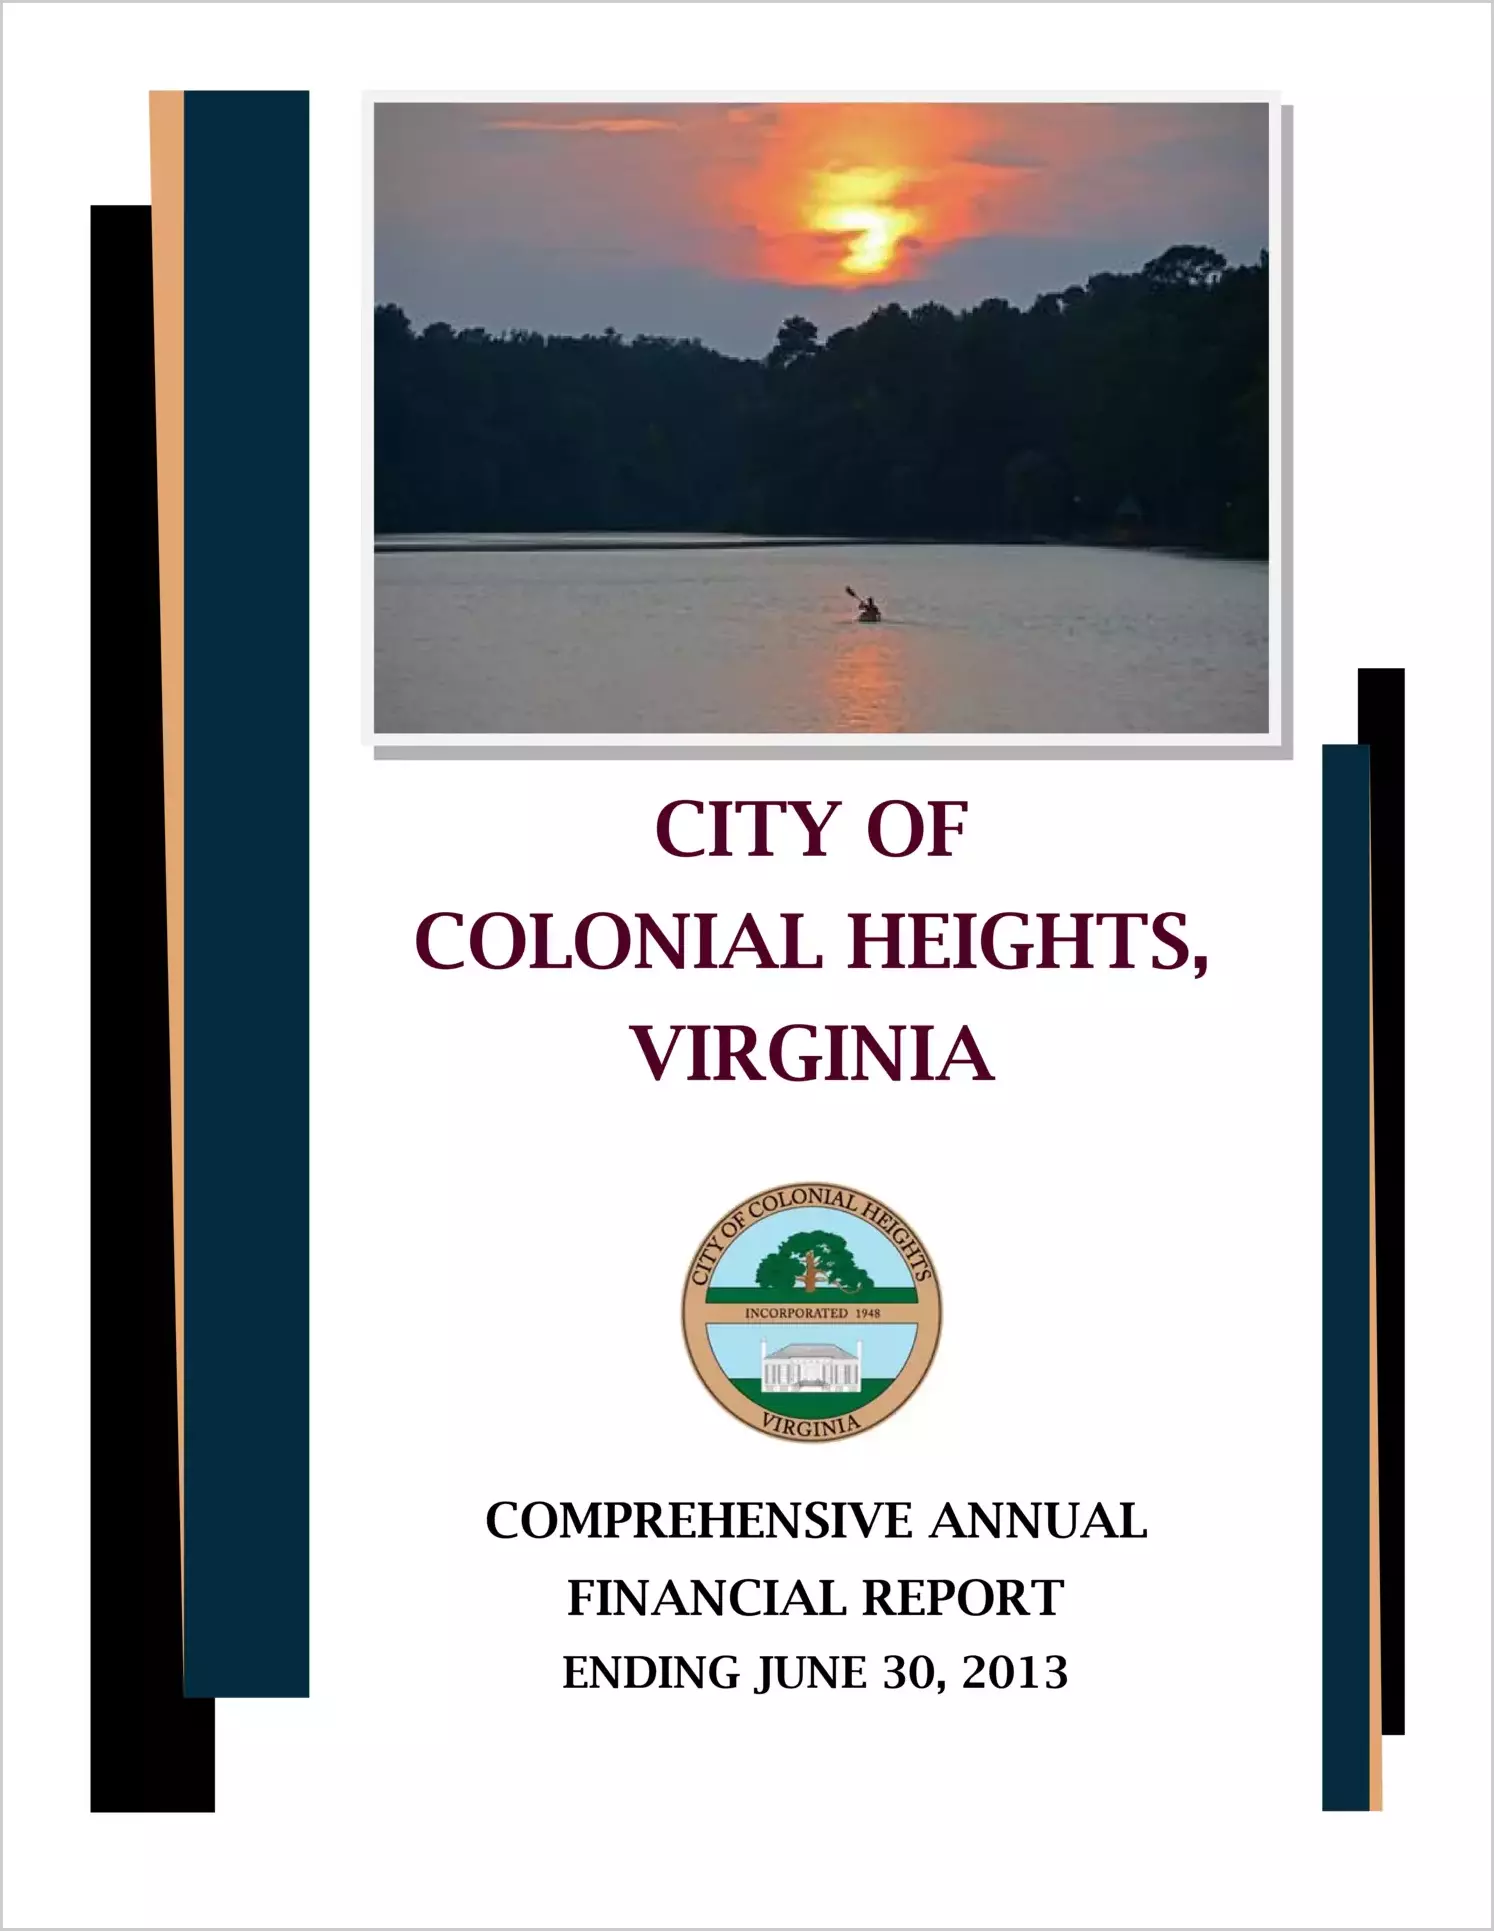 2013 Annual Financial Report for City of Colonial Heights